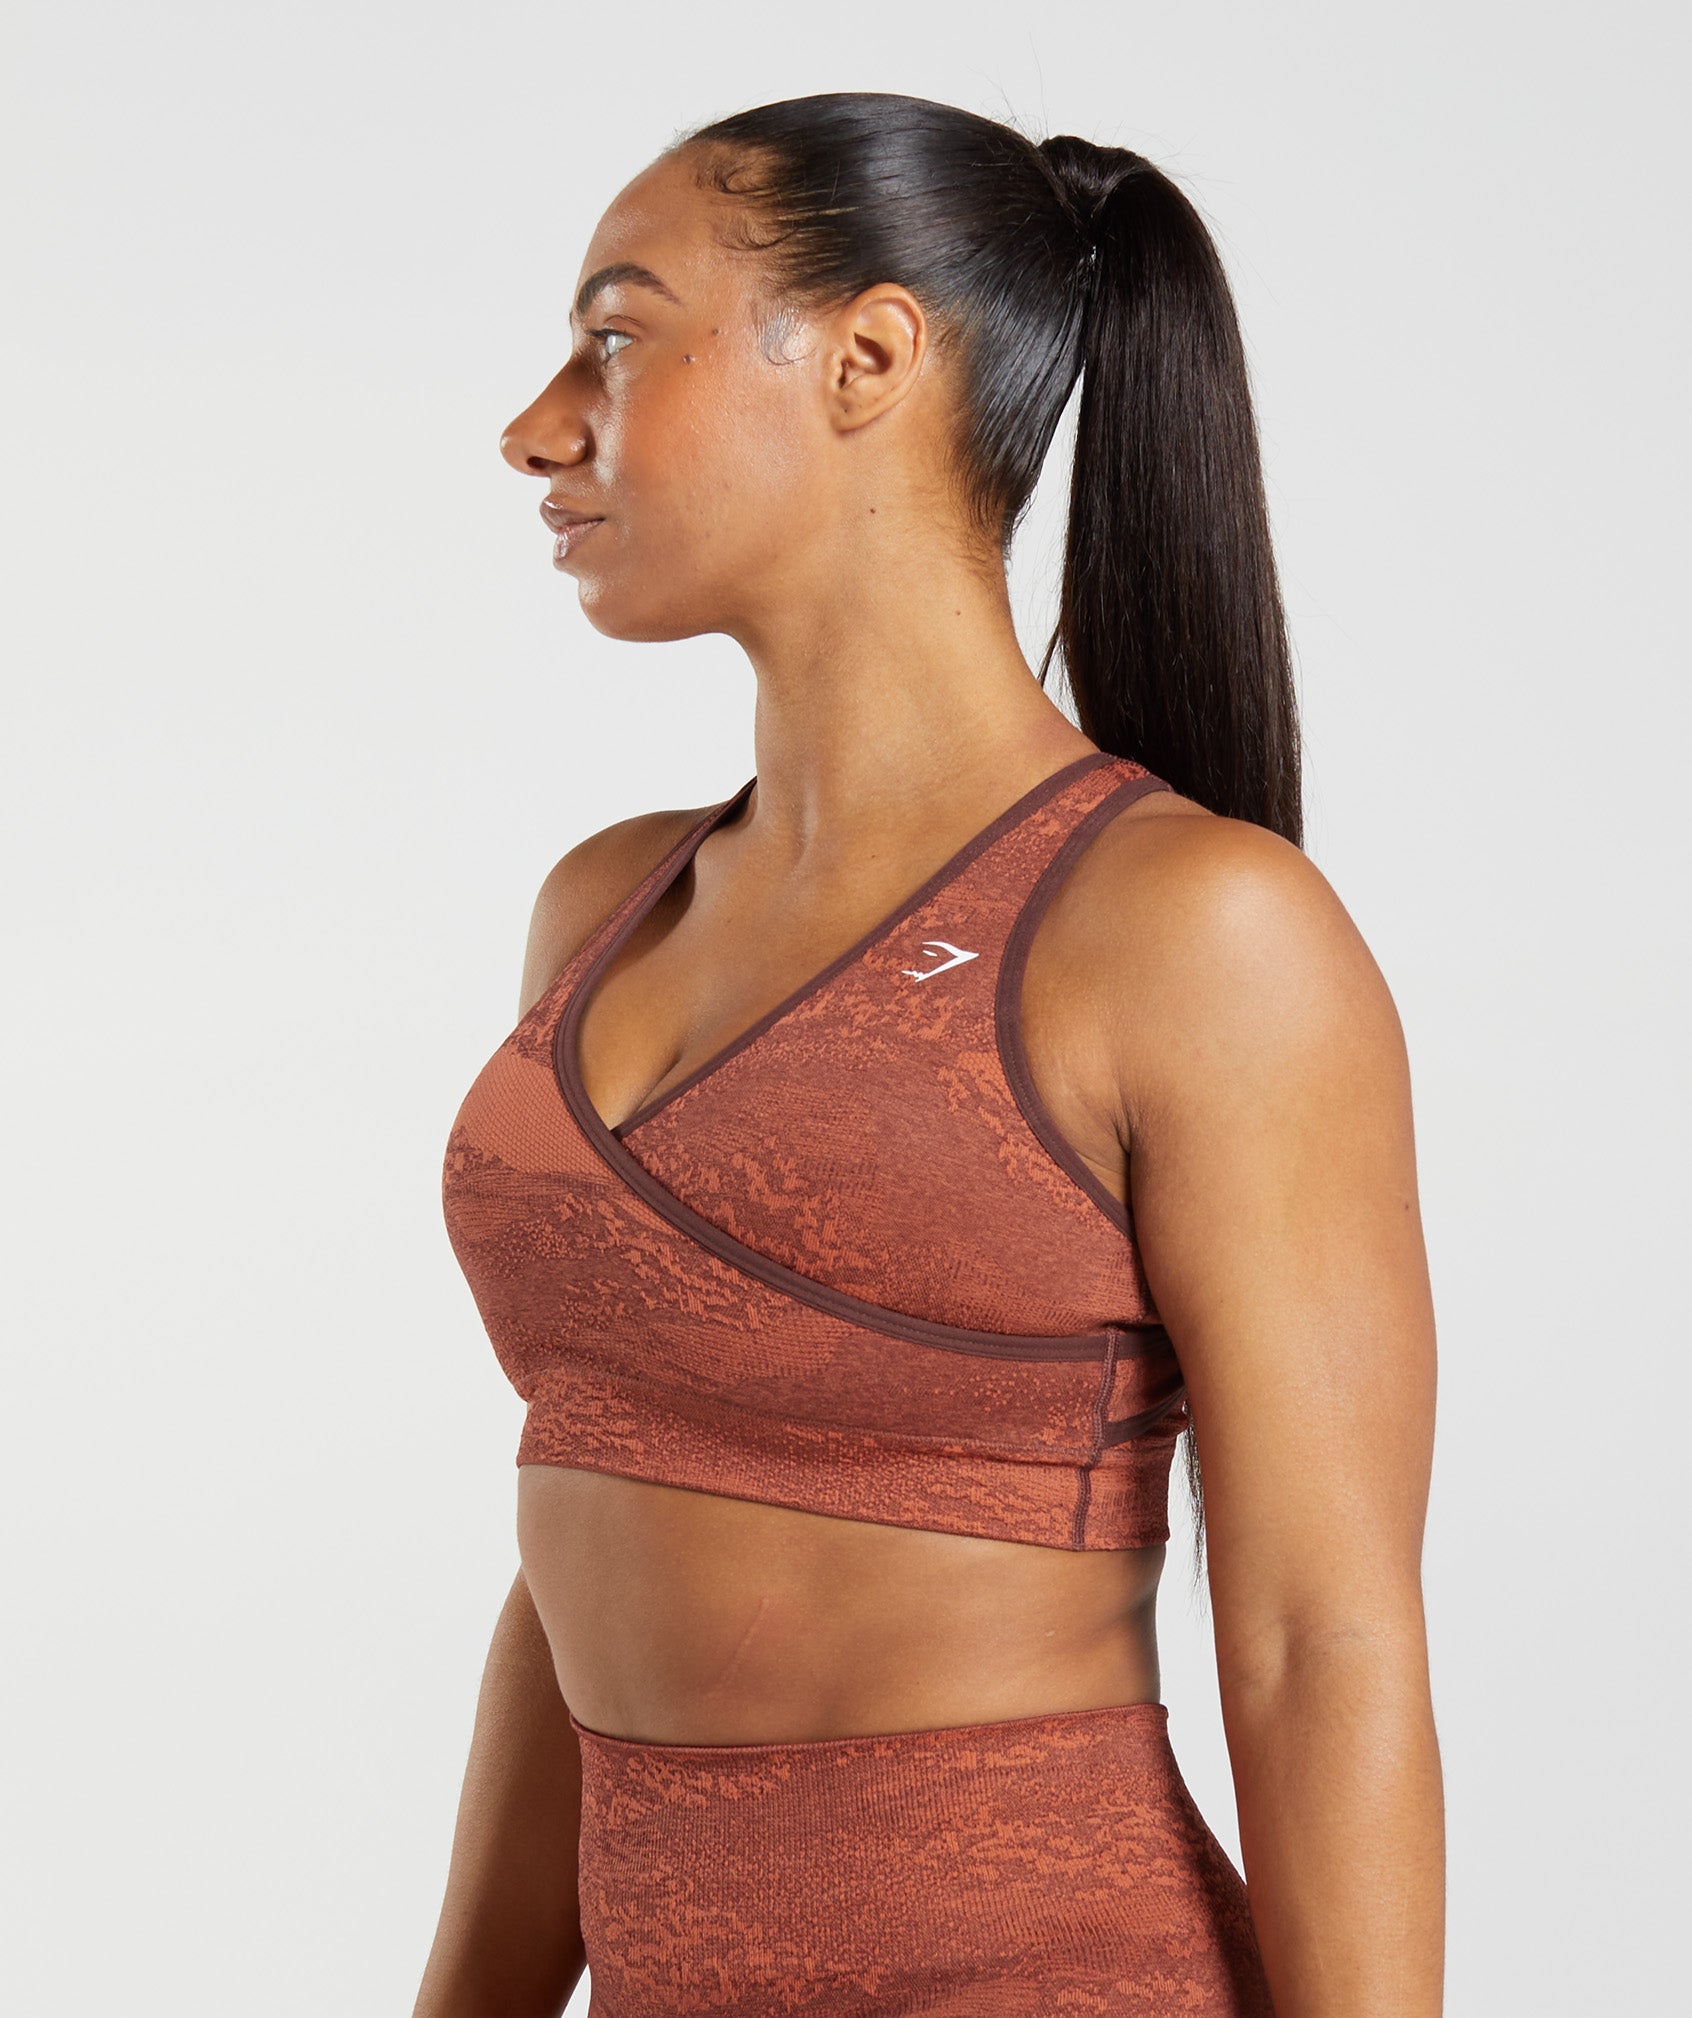 Gymshark V Neck Taupe Training Bra Tan Size M - $45 New With Tags - From  Elizabeth